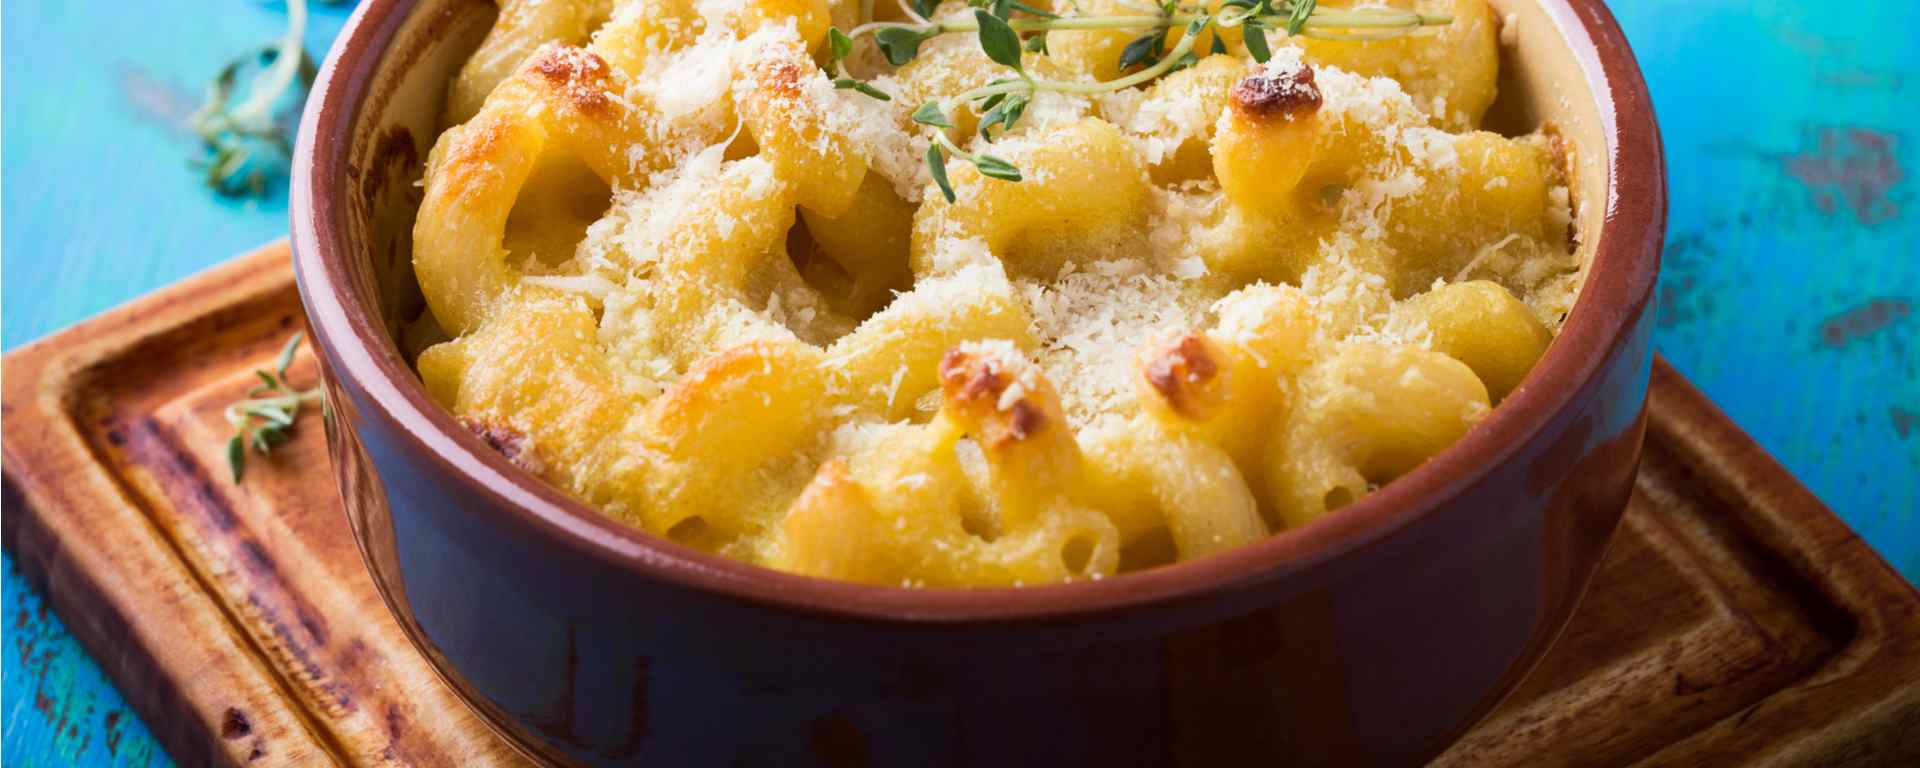 Photo of - Macaroni trois fromages